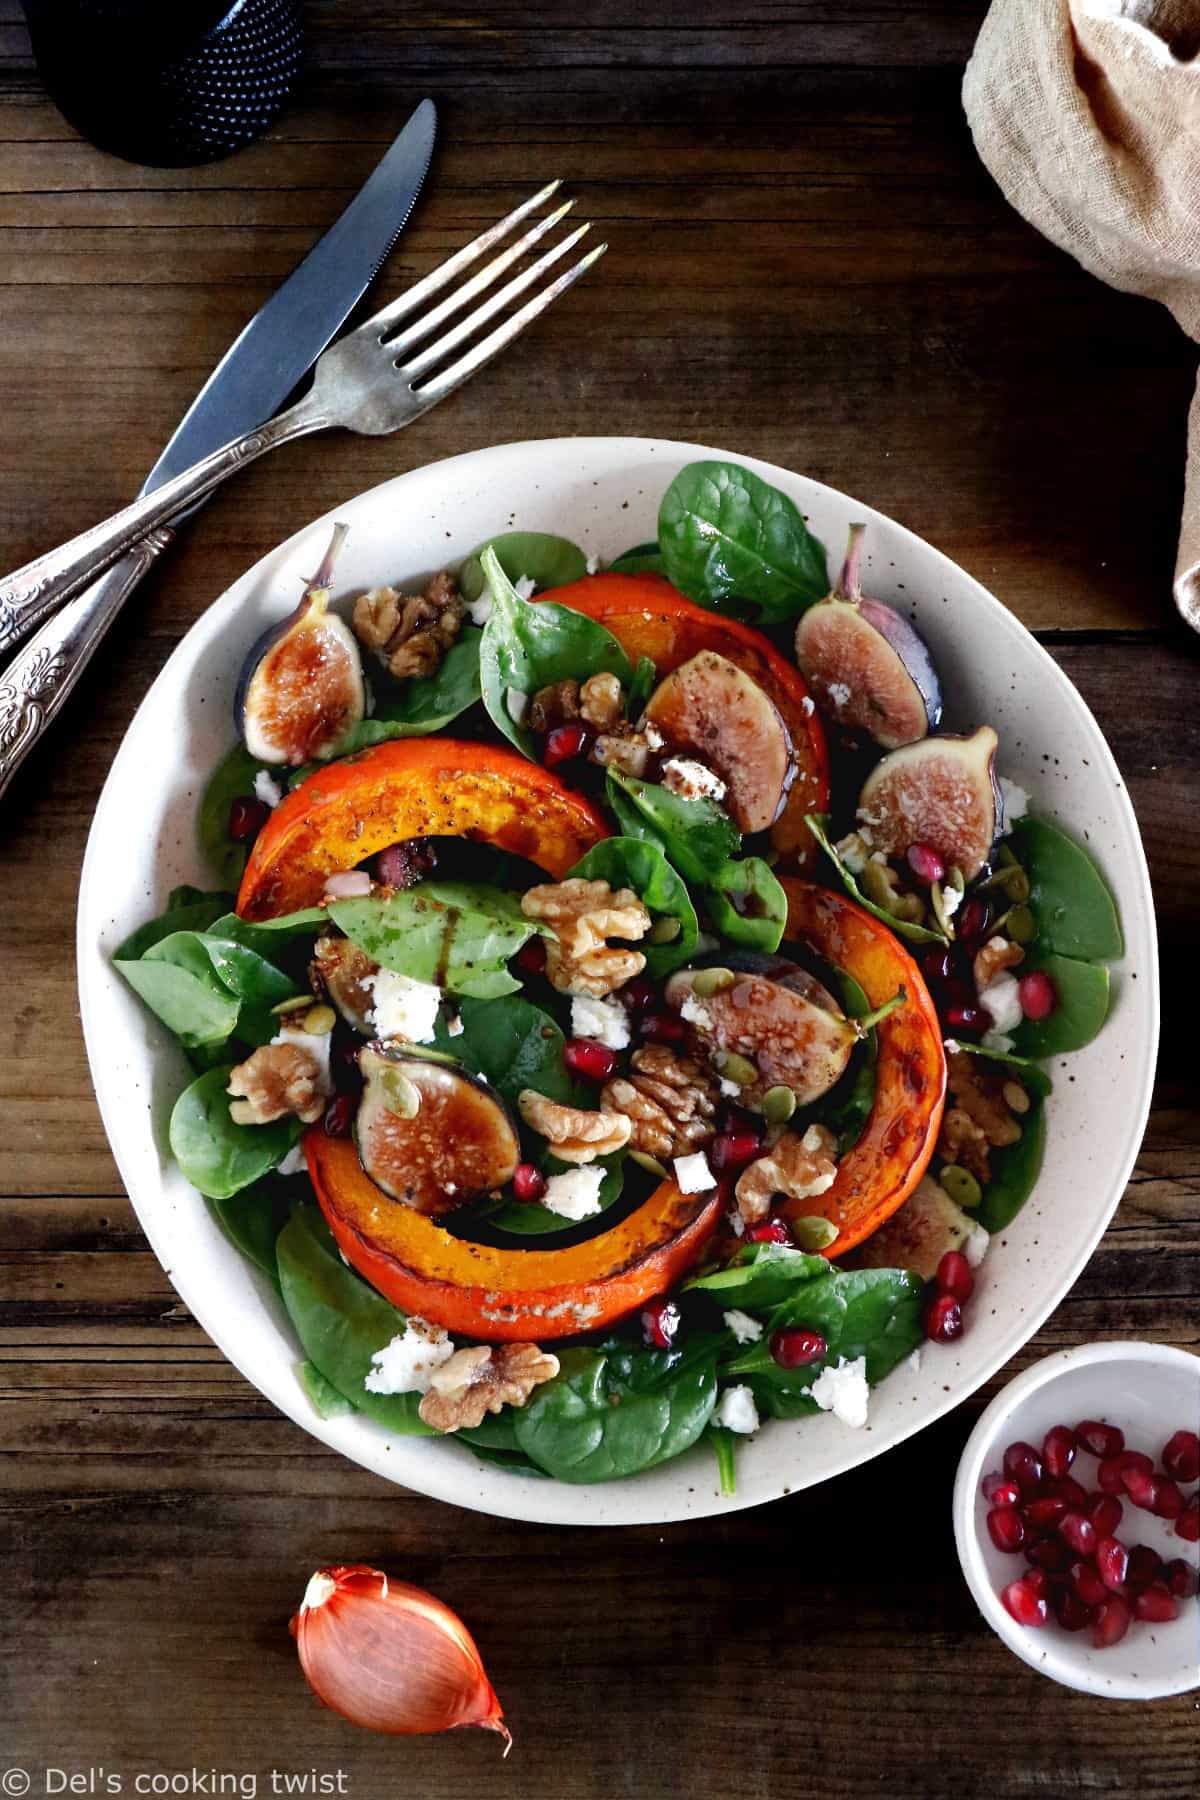 This roasted squash salad features caramelized figs with balsamic vinegar, baby spinach, and a subtle shallot vinaigrette.